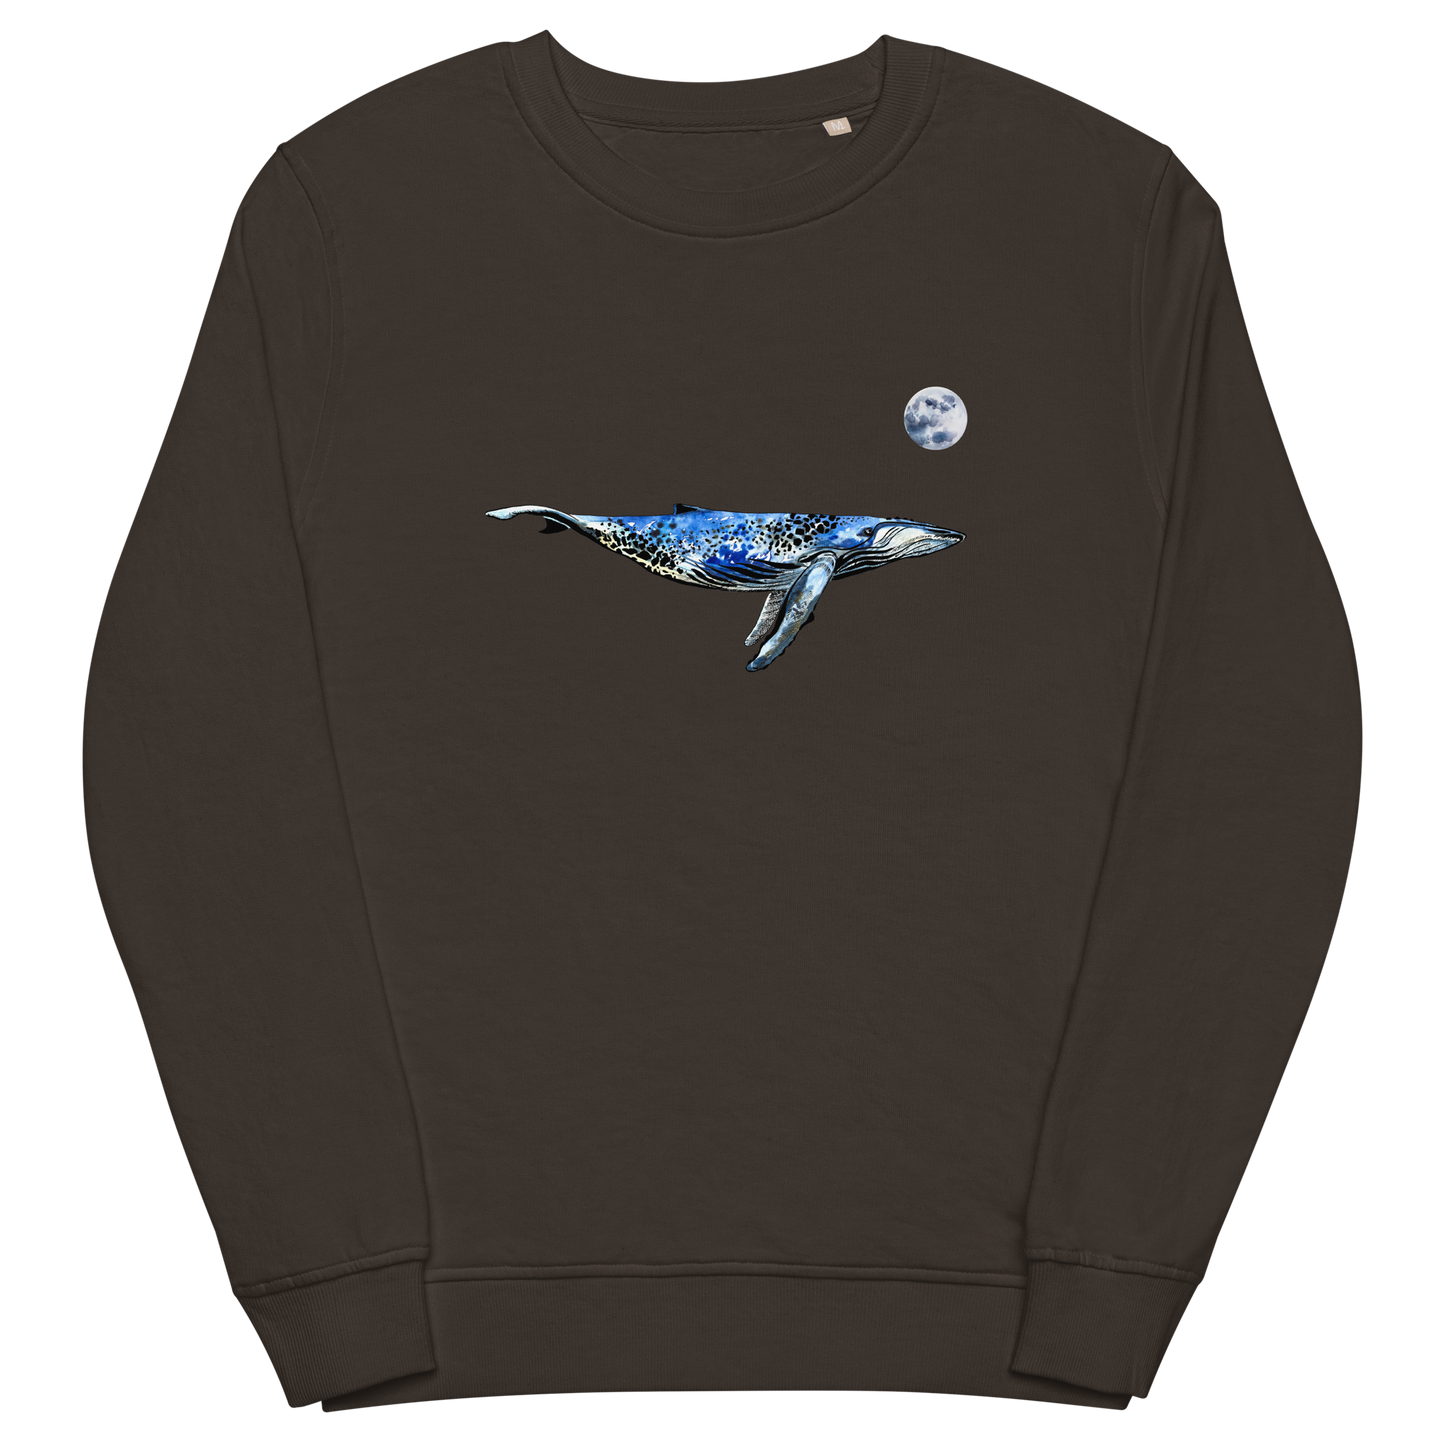 Deep Charcoal Grey Organic Cotton Whale Sweatshirt showcasing a captivating Whale Under The Moon graphic on the chest - Cool Whale Graphic Sweatshirts - Boozy Fox